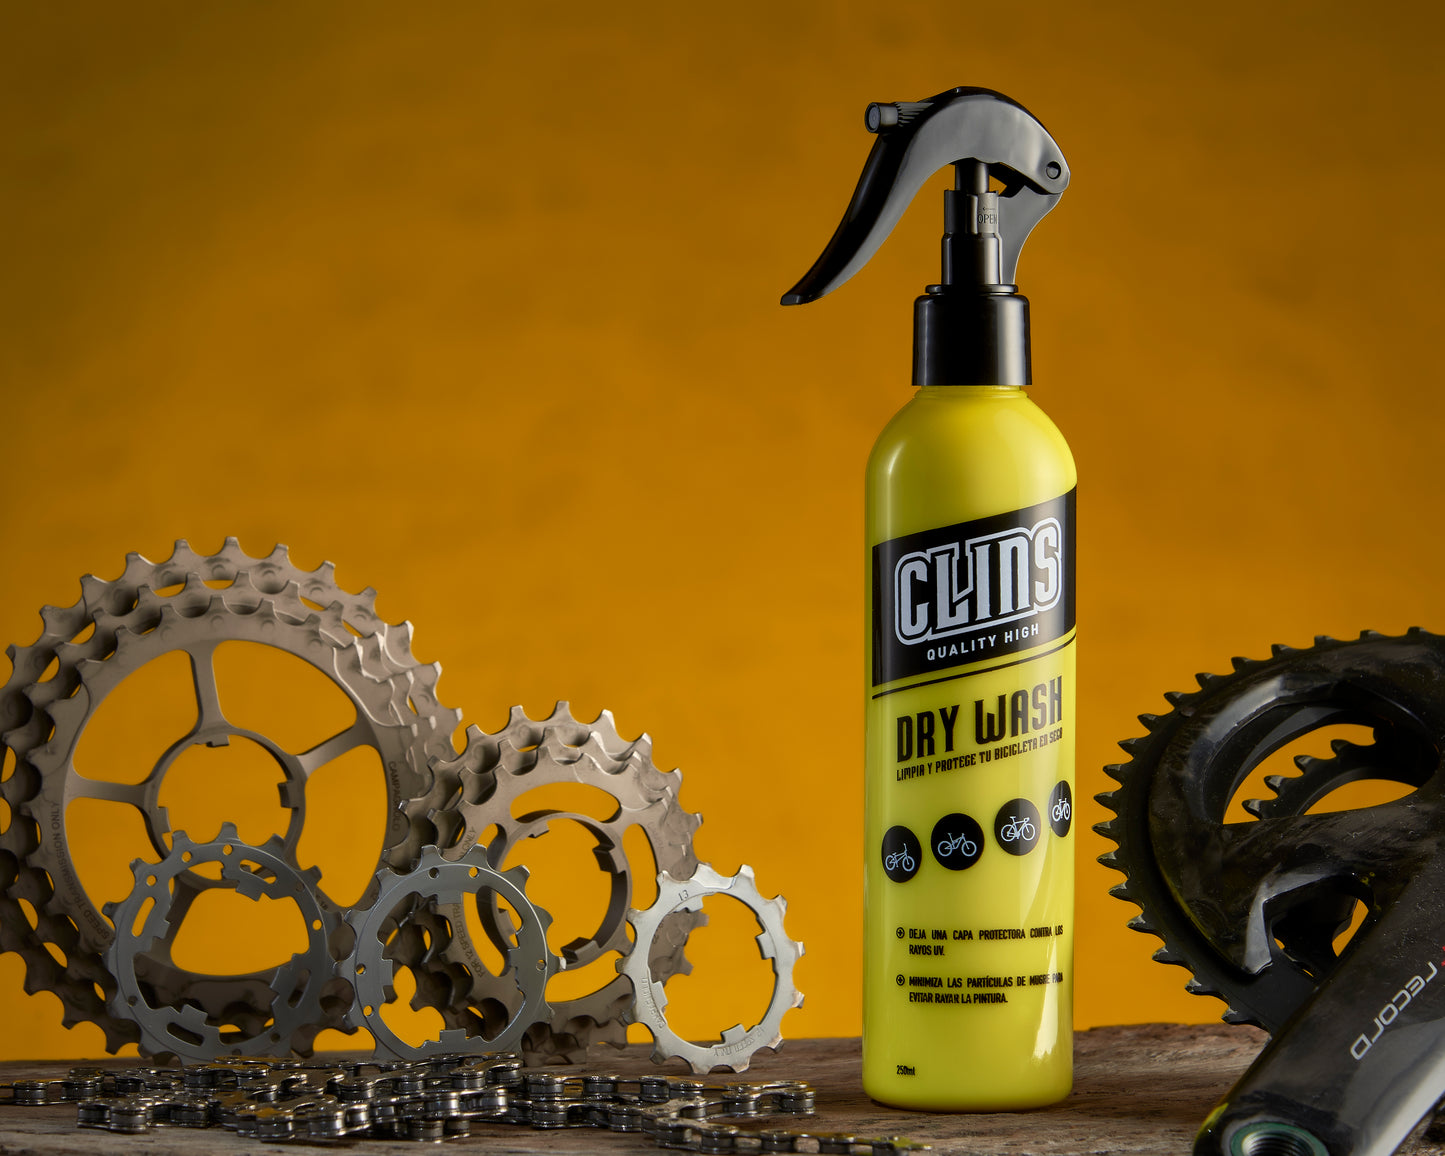 CLEANING KIT 4 CLINS ( SHAMPOO + DEGREASER + BIKE PROTECT + DRY WASH)